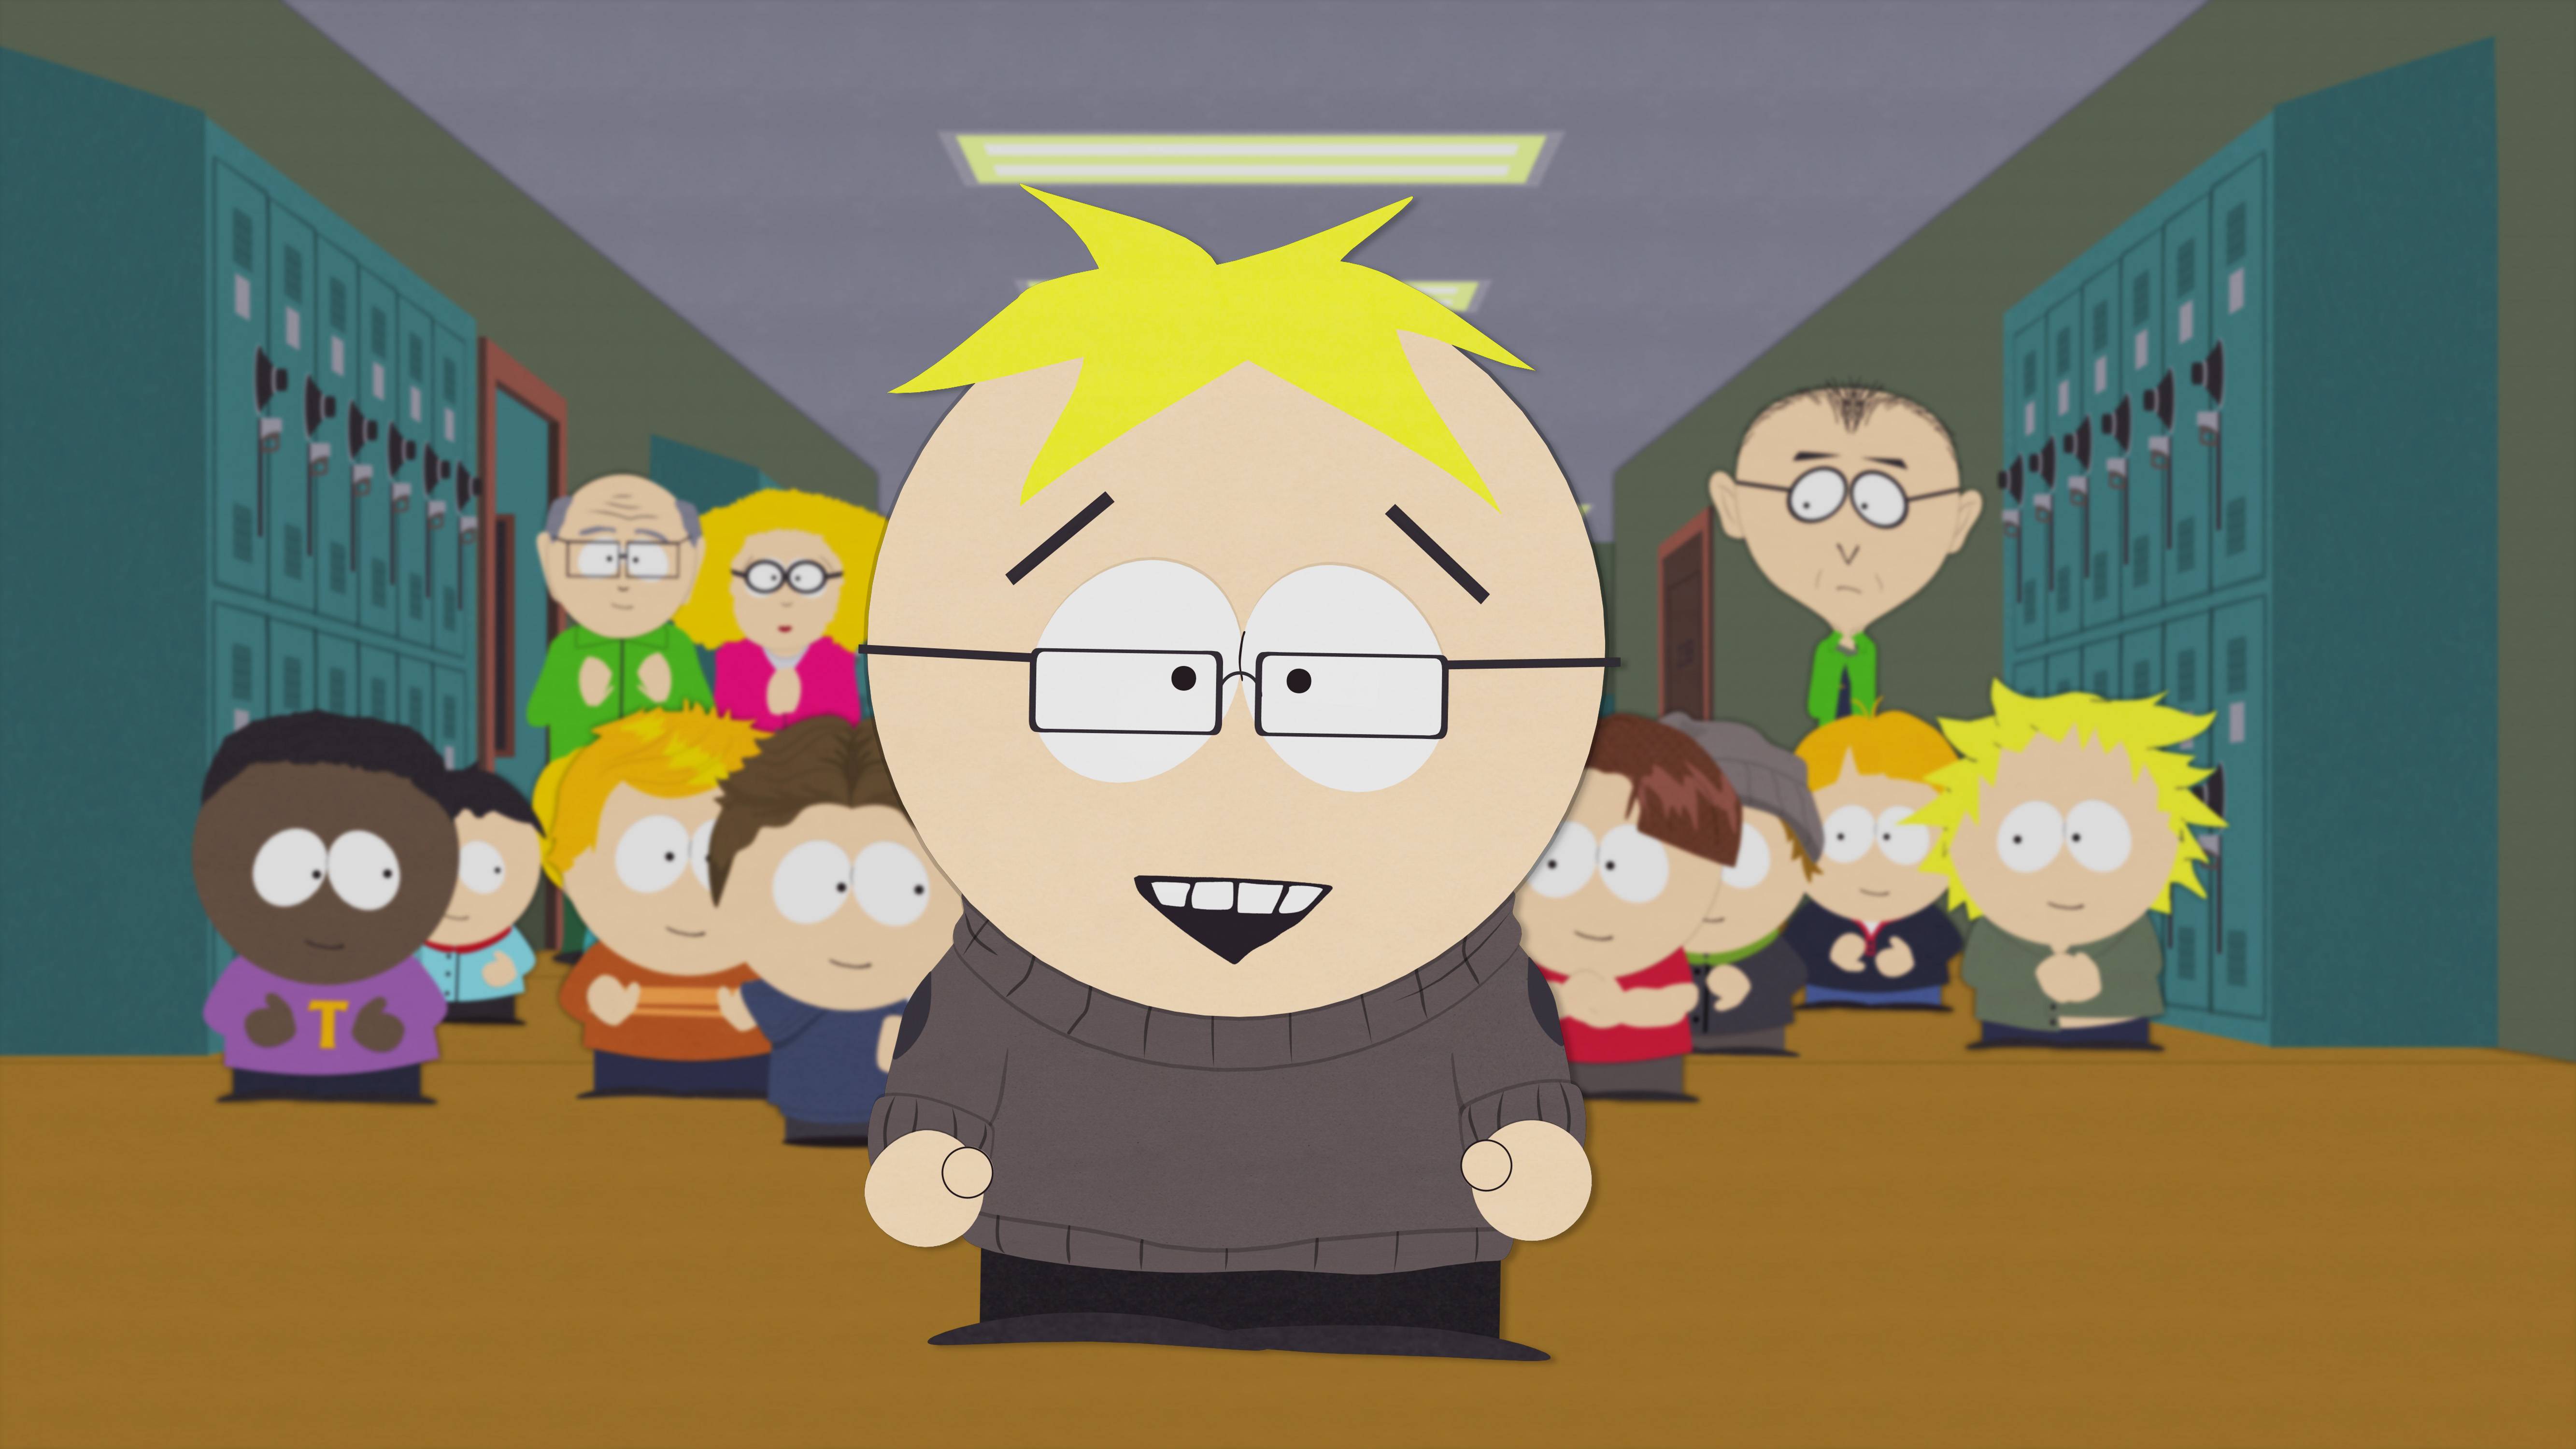 andy dobson recommends South Park Season 14 Episode 5